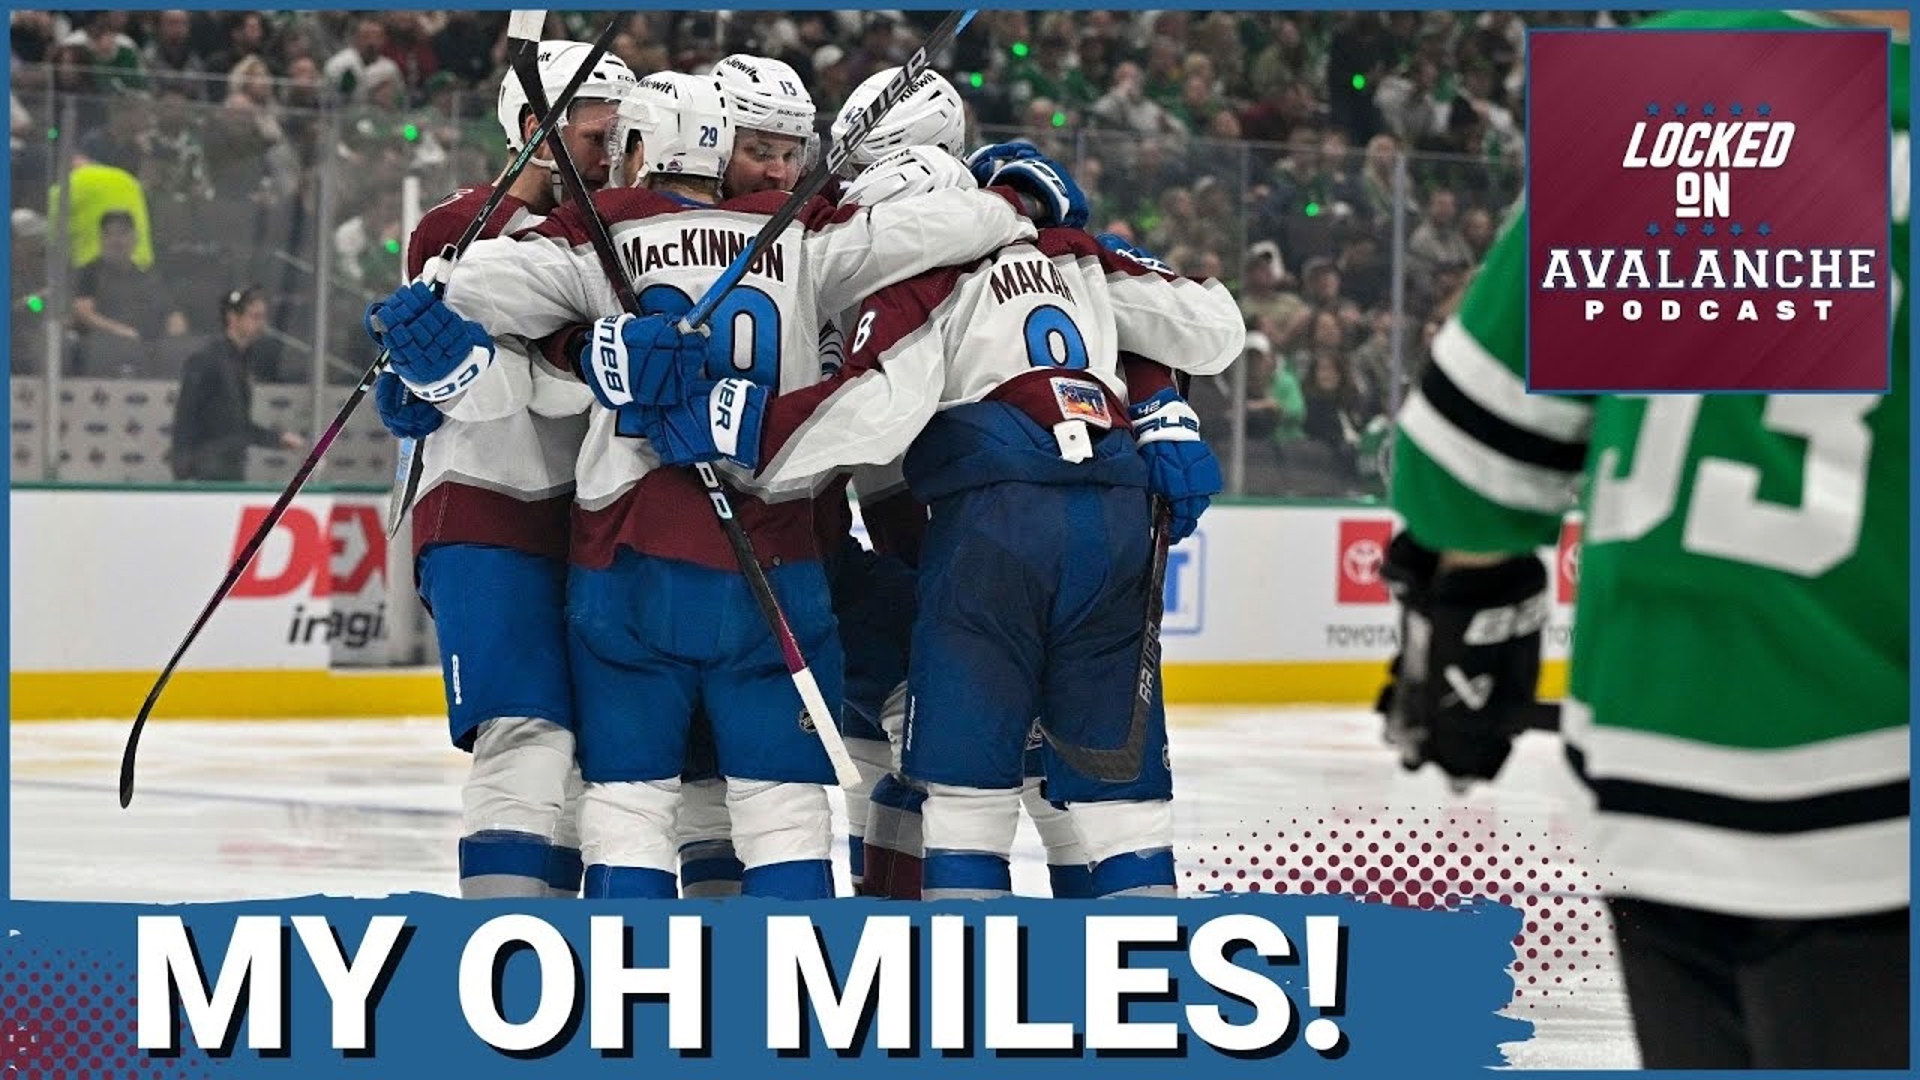 Three goals in the first period for the Dallas Stars left too much time left for the Colorado Avalanche to mount a come back, and that is exactly what they did.